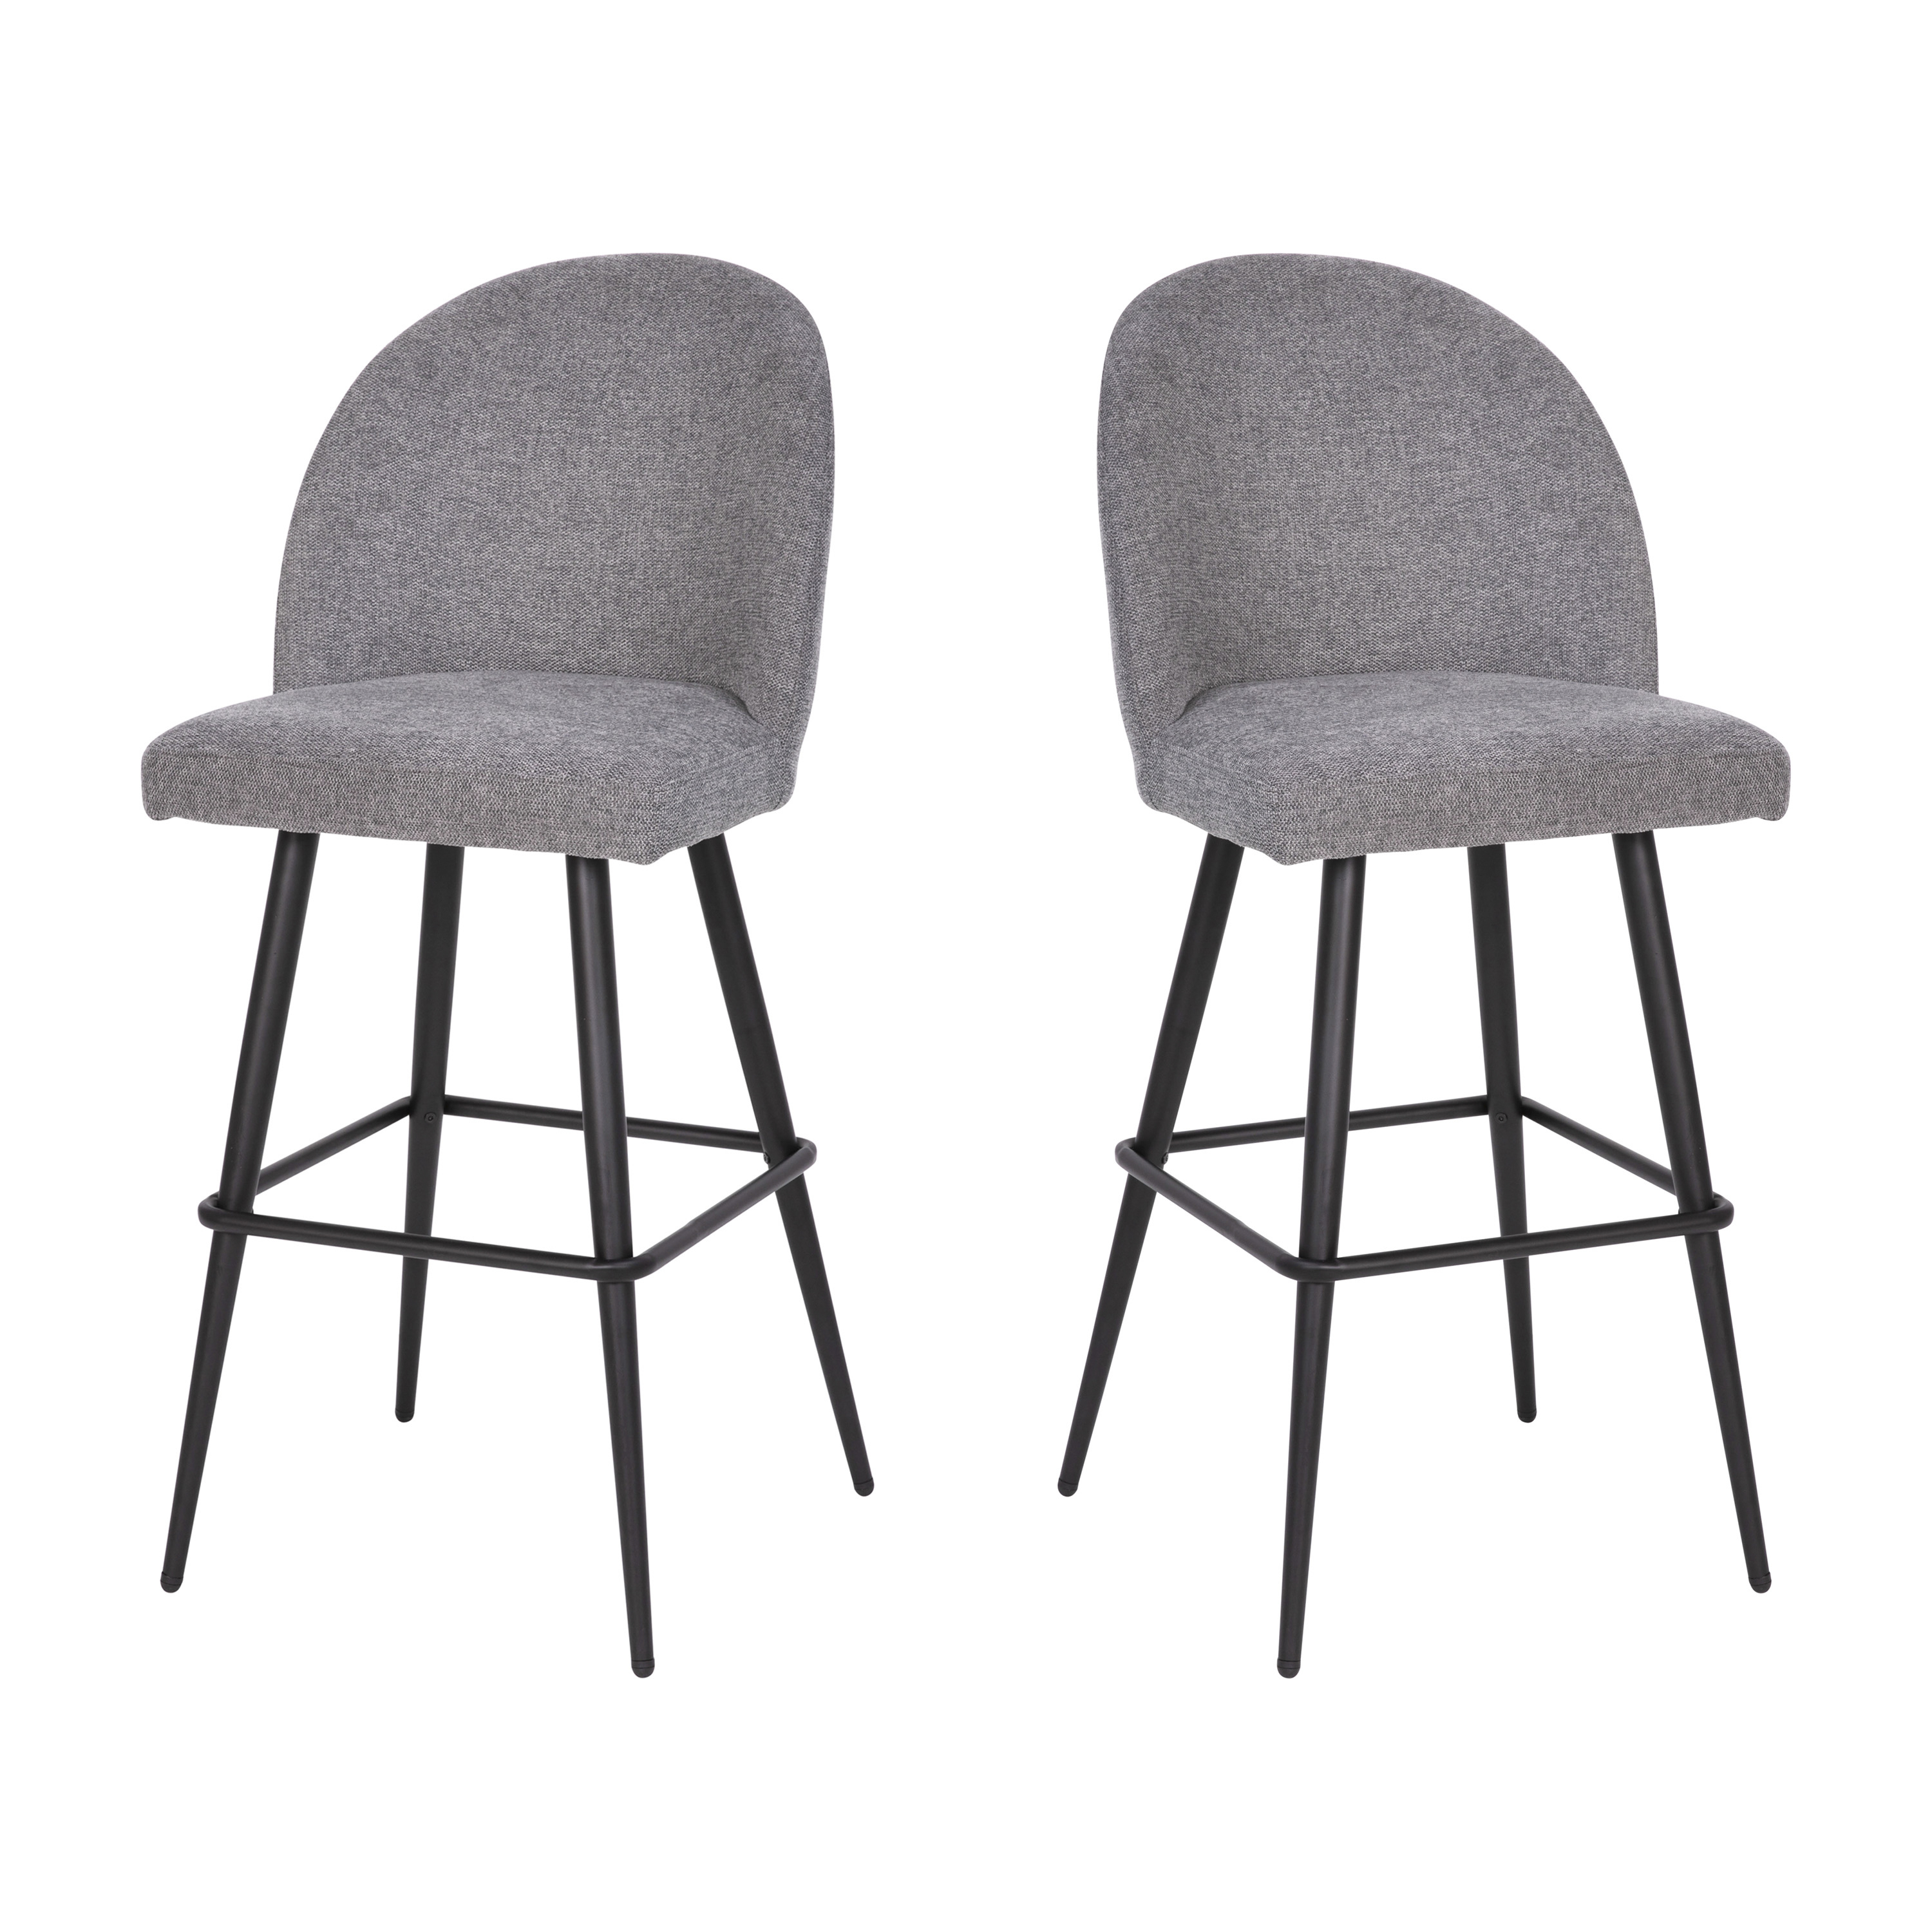 Flash Furniture AY-1026H-30-GYFAB-GG Gray Faux Linen High Back Modern Armless 30" Bar Stool with Contoured Backrest, Set of 2